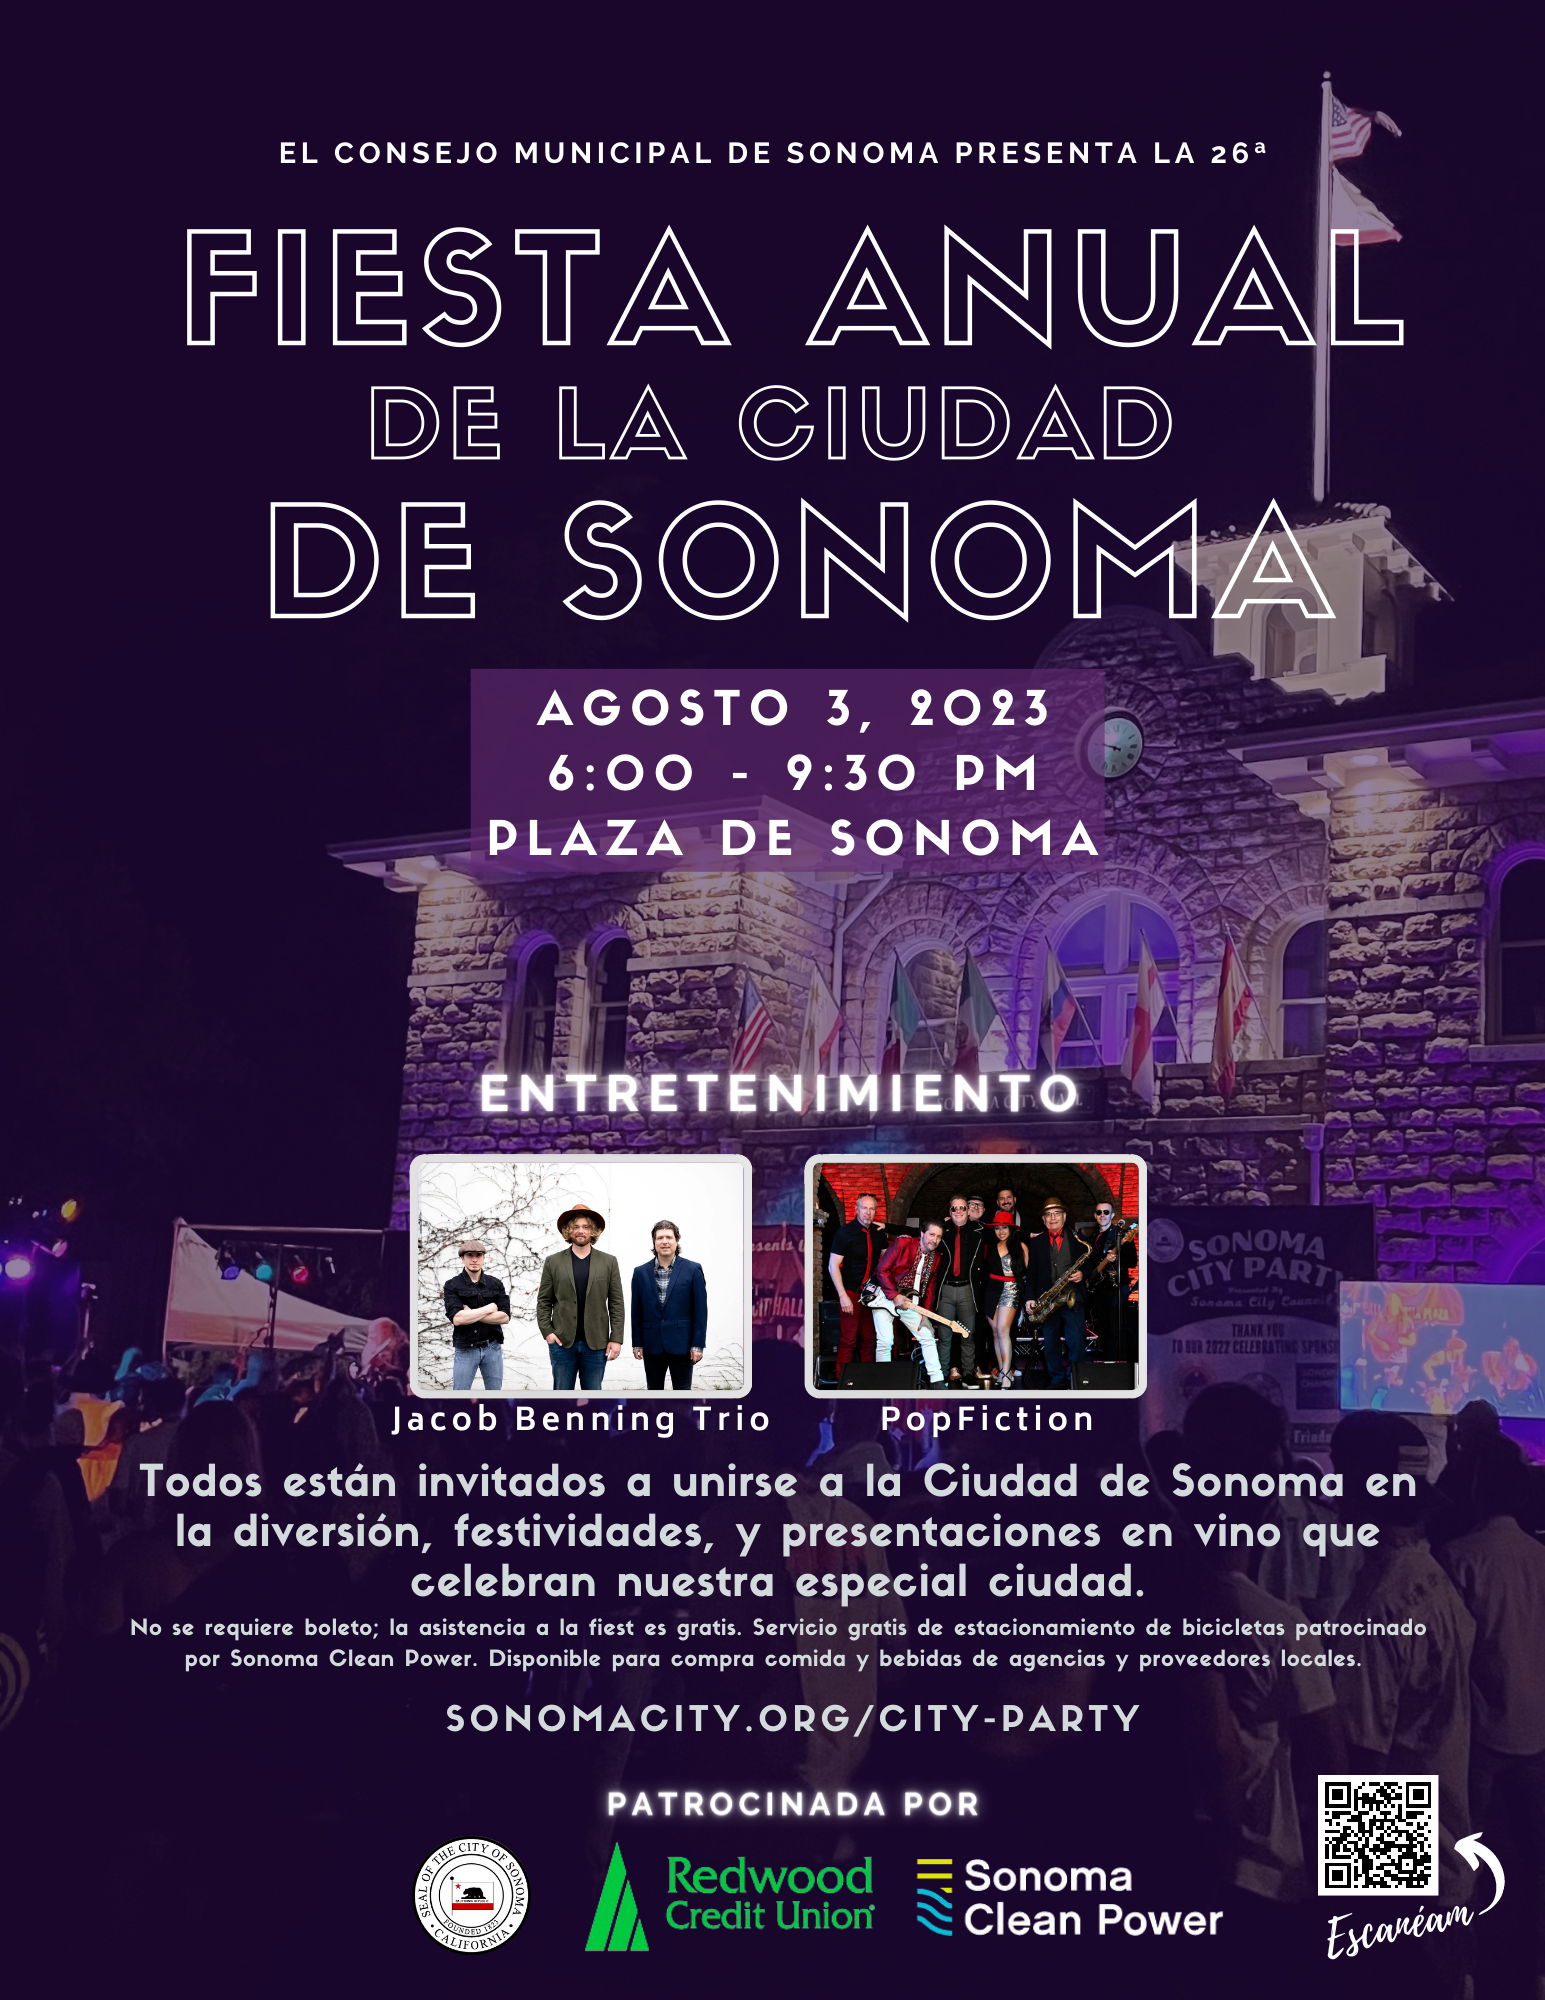 8.5x11 inch Flyer in Spanish promoting the Sonoma City Party on August 3rd, 2023 featuring a Photo of Sonoma City Hall lit up with a stage performance in front and a crowd watching.